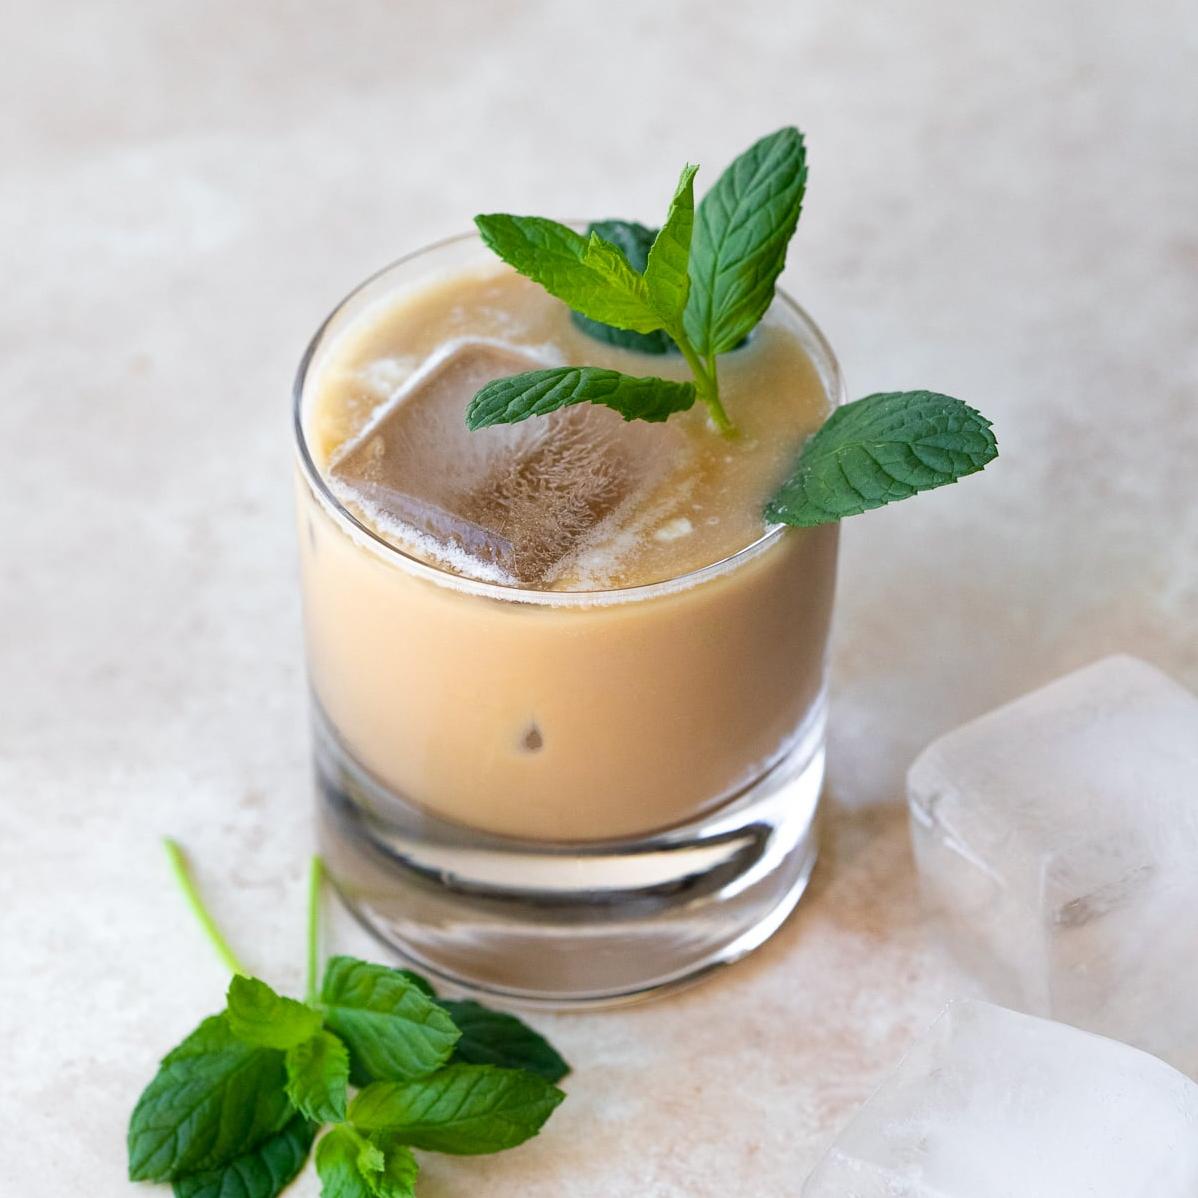  Cool off with our refreshing Iced Mint Coffee!